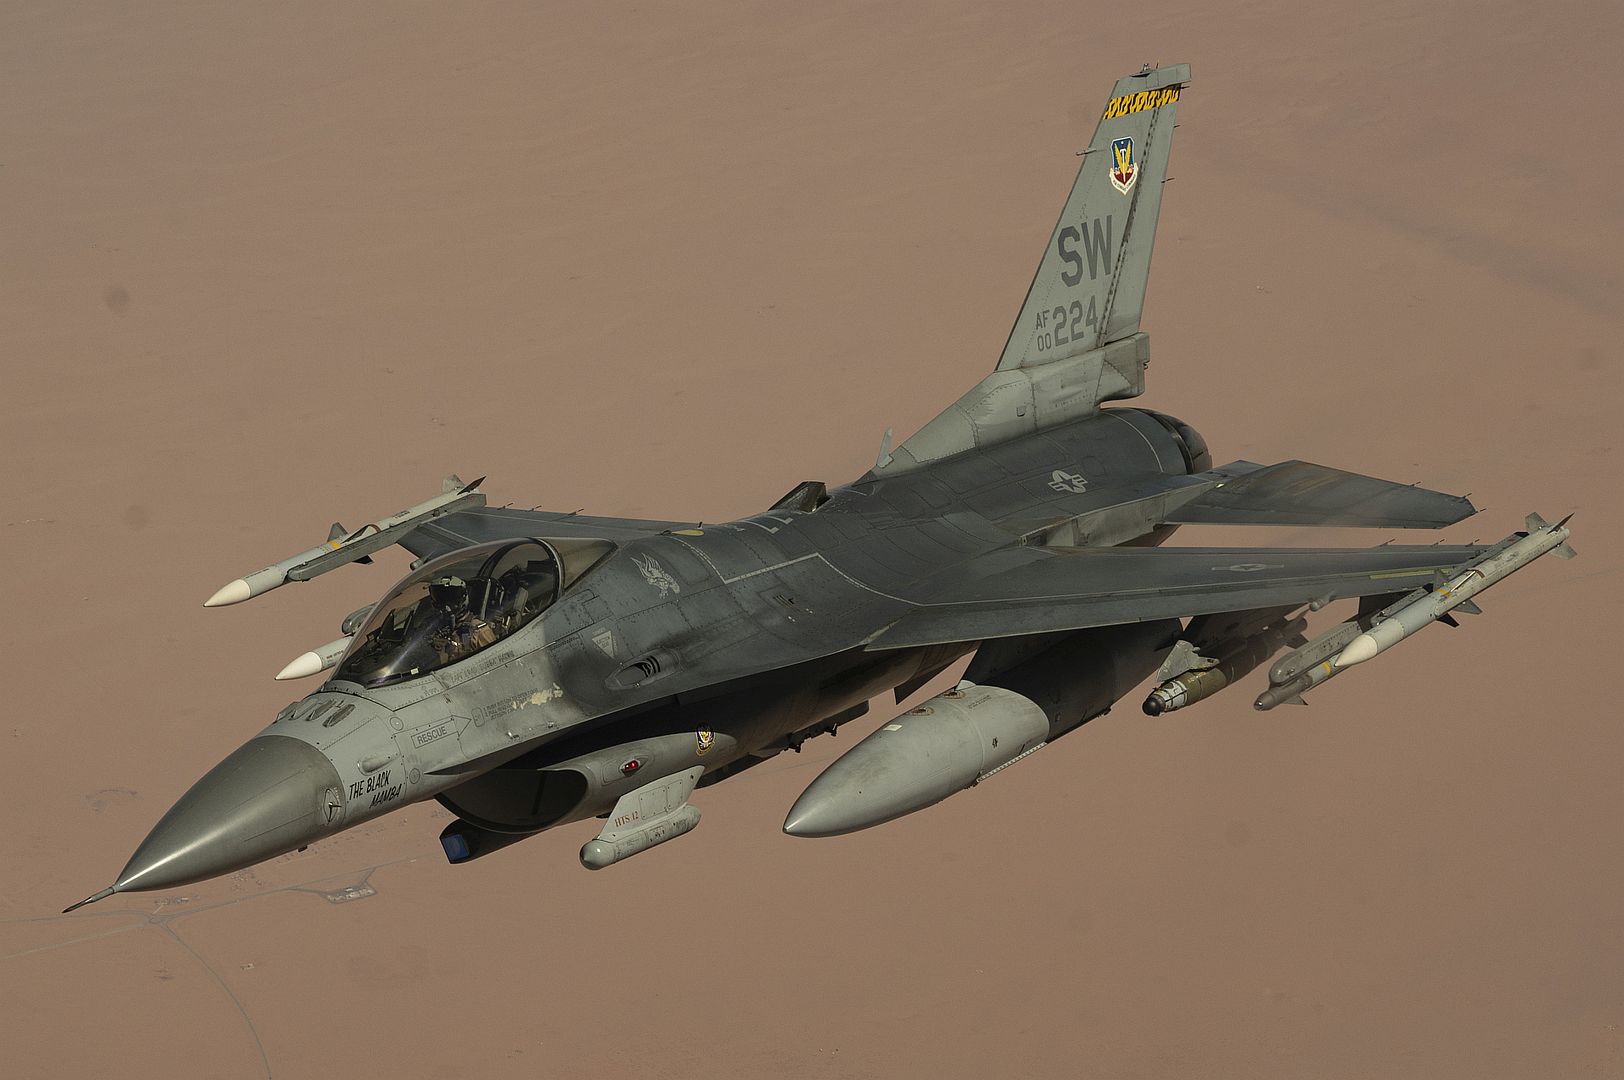 16 Fighting Falcon Assigned To The 77th Expeditionary Fighter Squadron Flies A Combat Patrol Mission In Support Of Operation Inherent Resolve